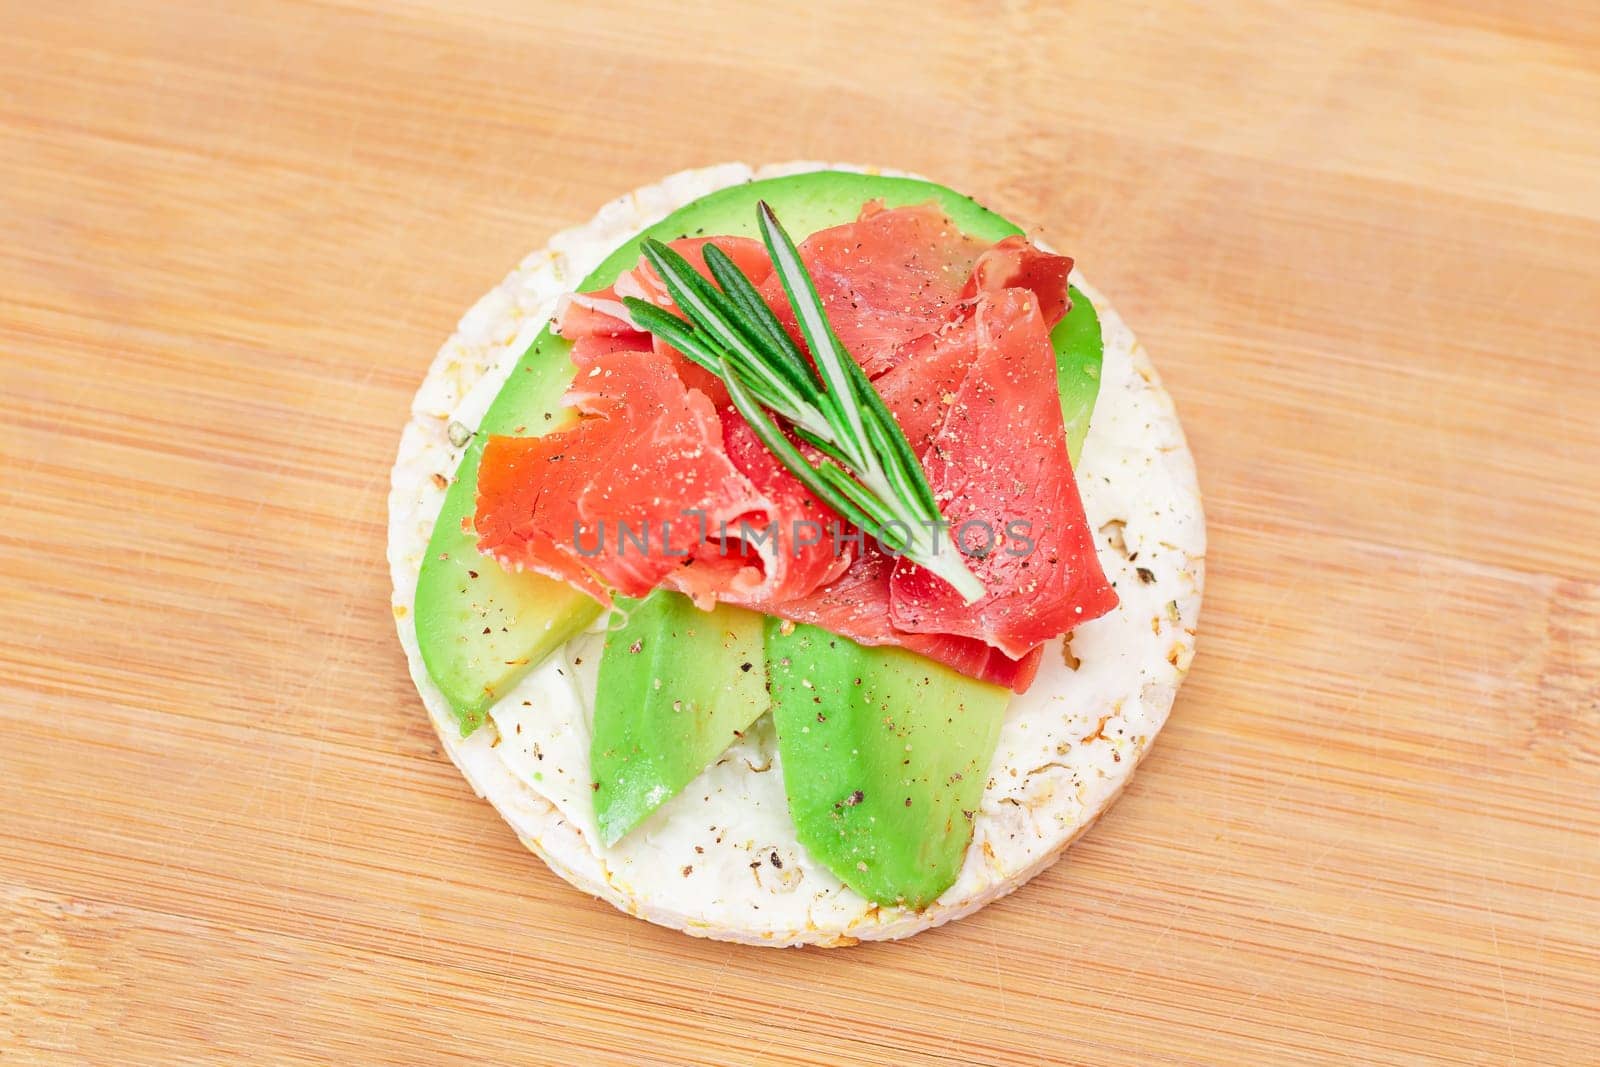 Rice Cake Sandwich with Fresh Avocado, Jamon and Rosemary by InfinitumProdux